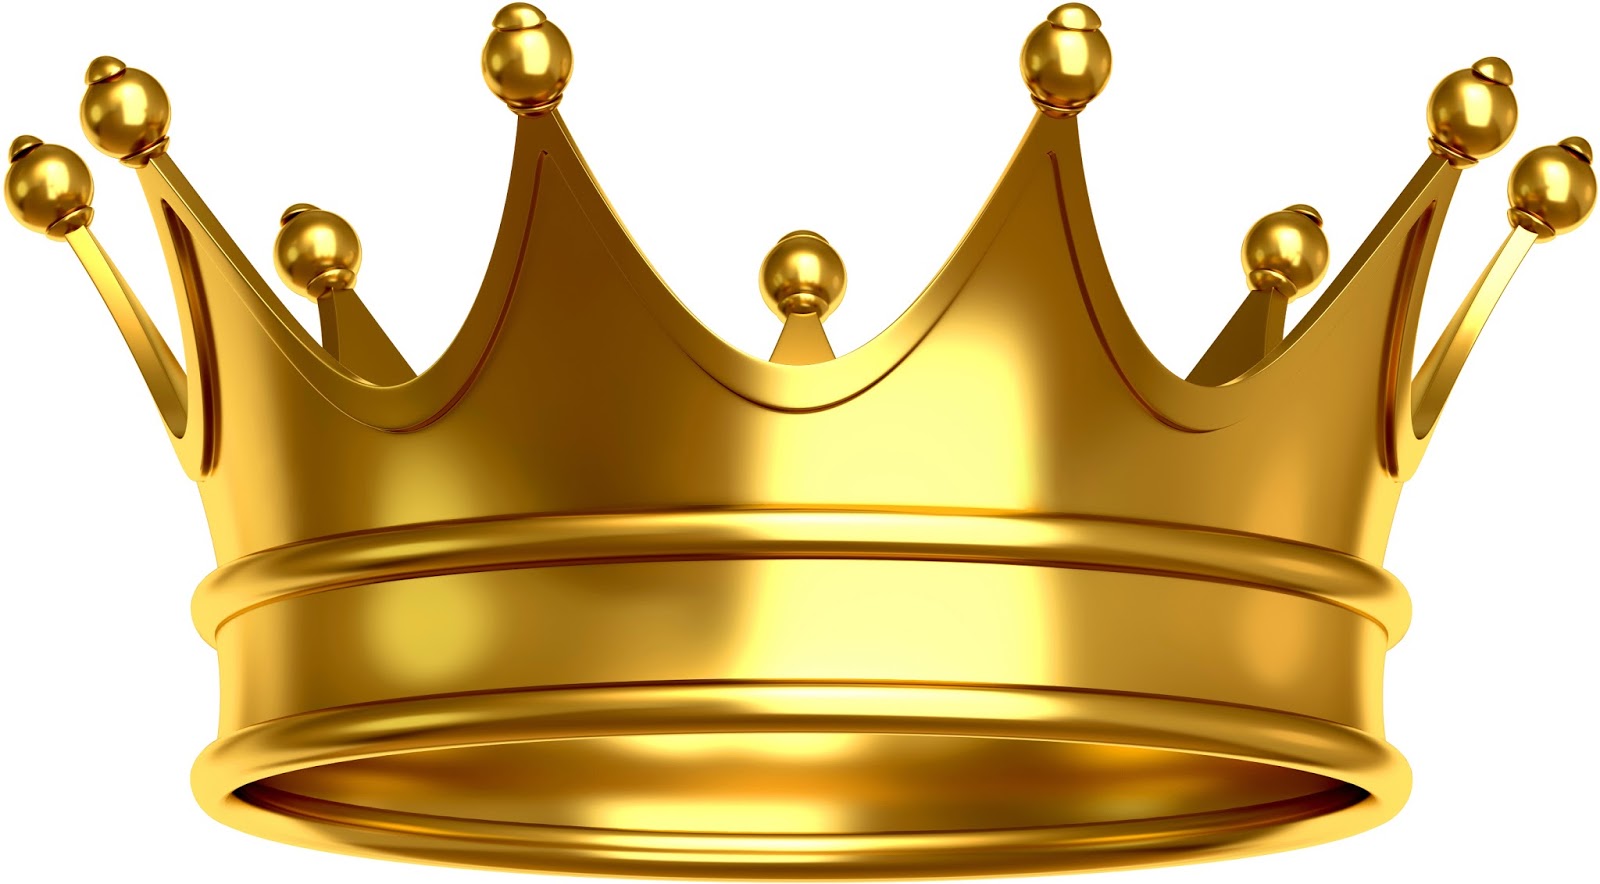 clip art of a king's crown - photo #36